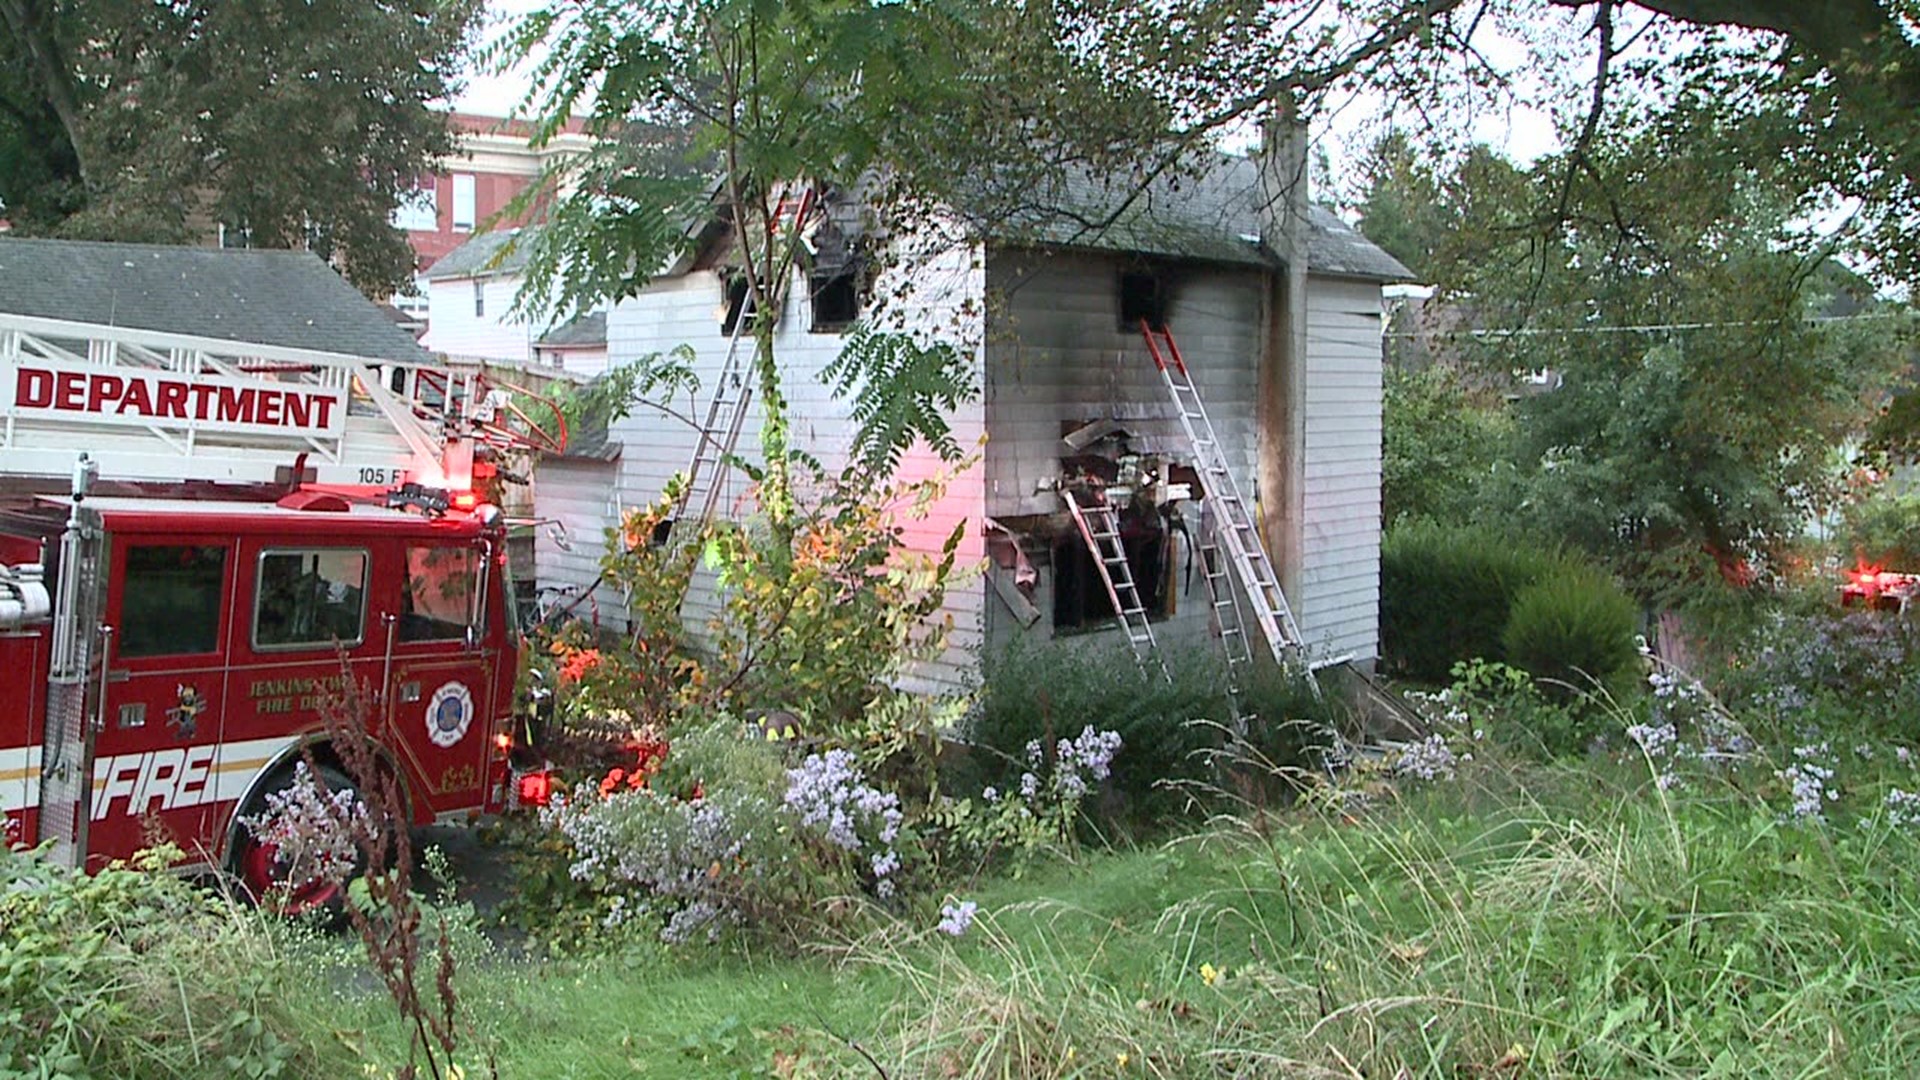 Police took the former occupant of the home into custody because of the suspicious circumstances surrounding the fire.